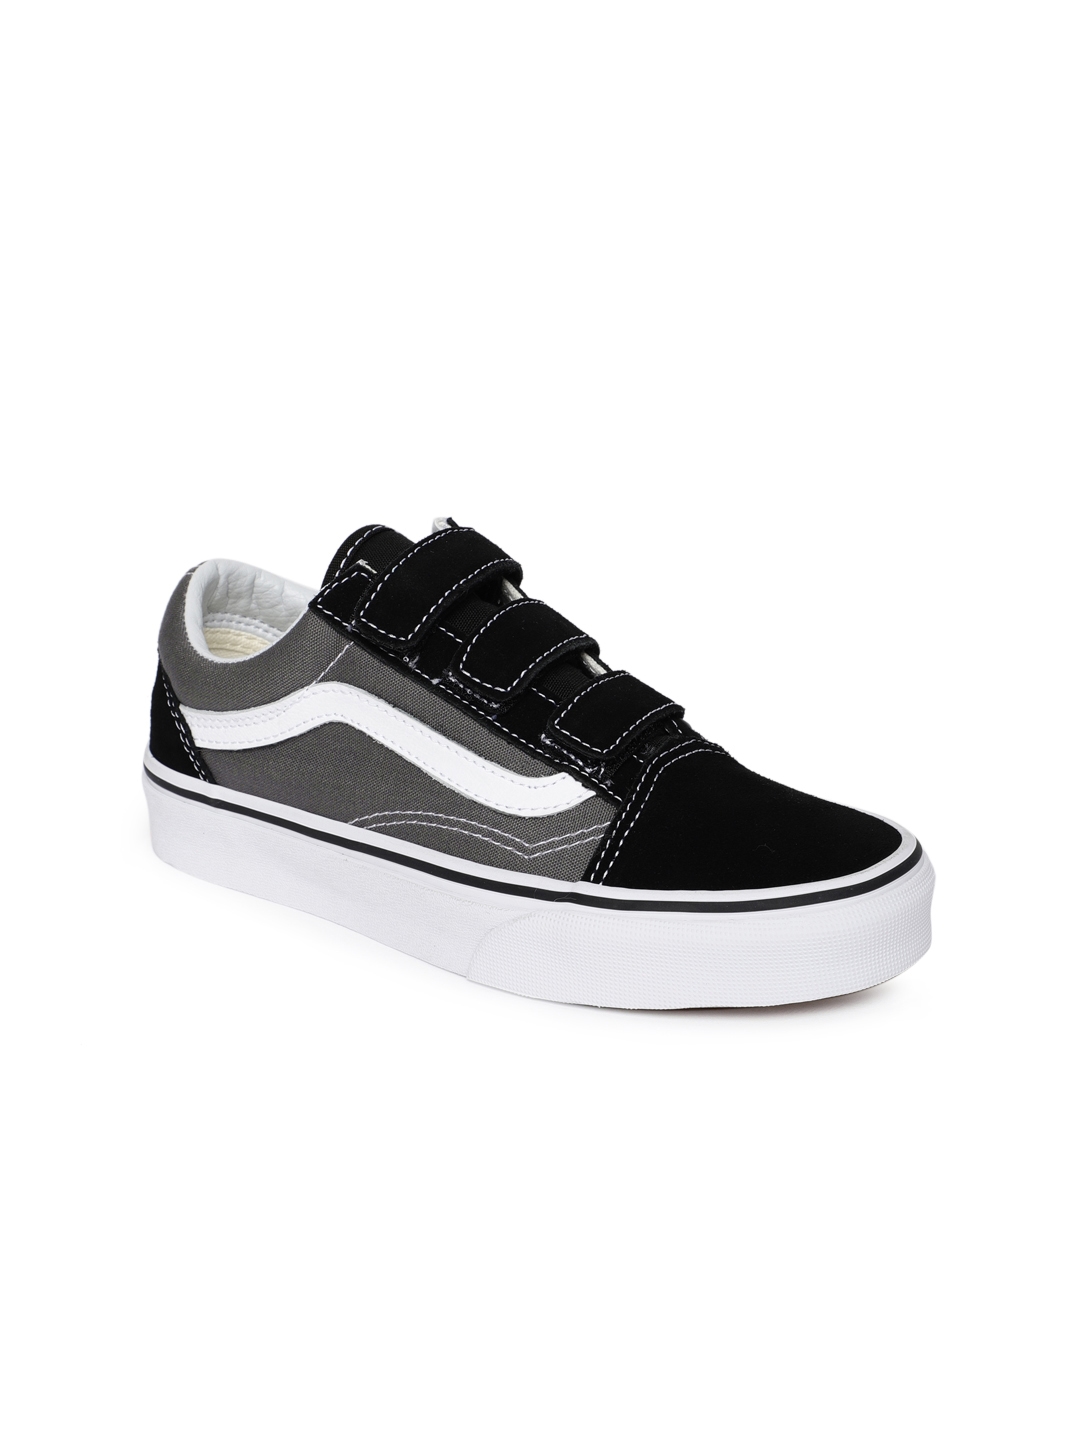 myntra vans shoes, OFF 75%,Latest trends!